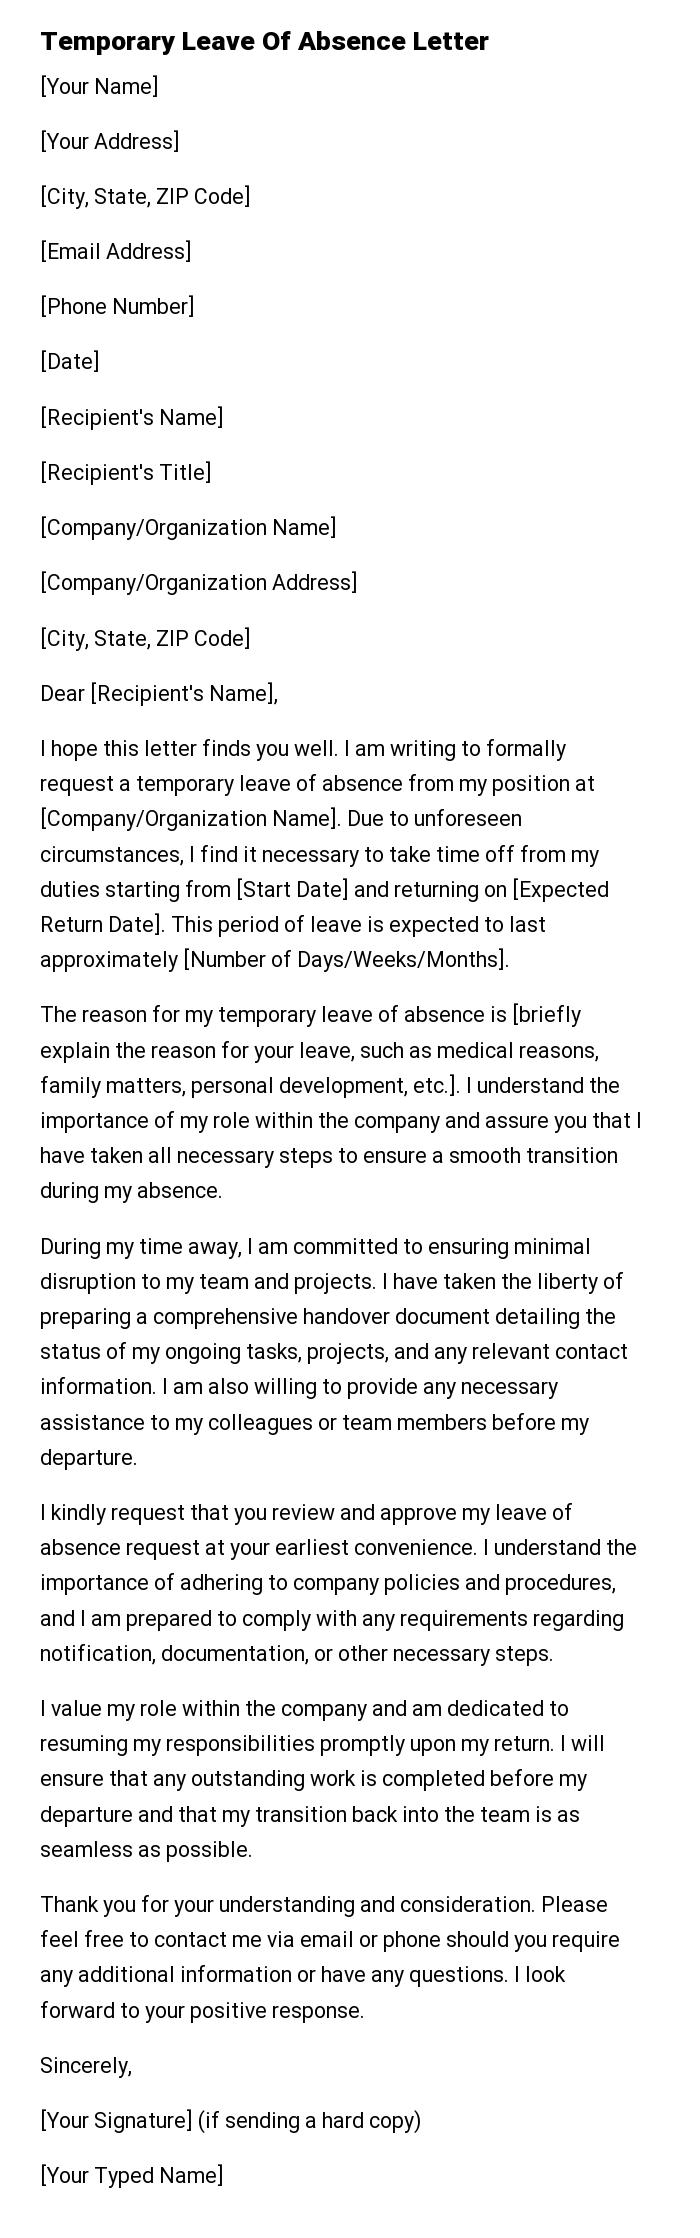 Temporary Leave Of Absence Letter